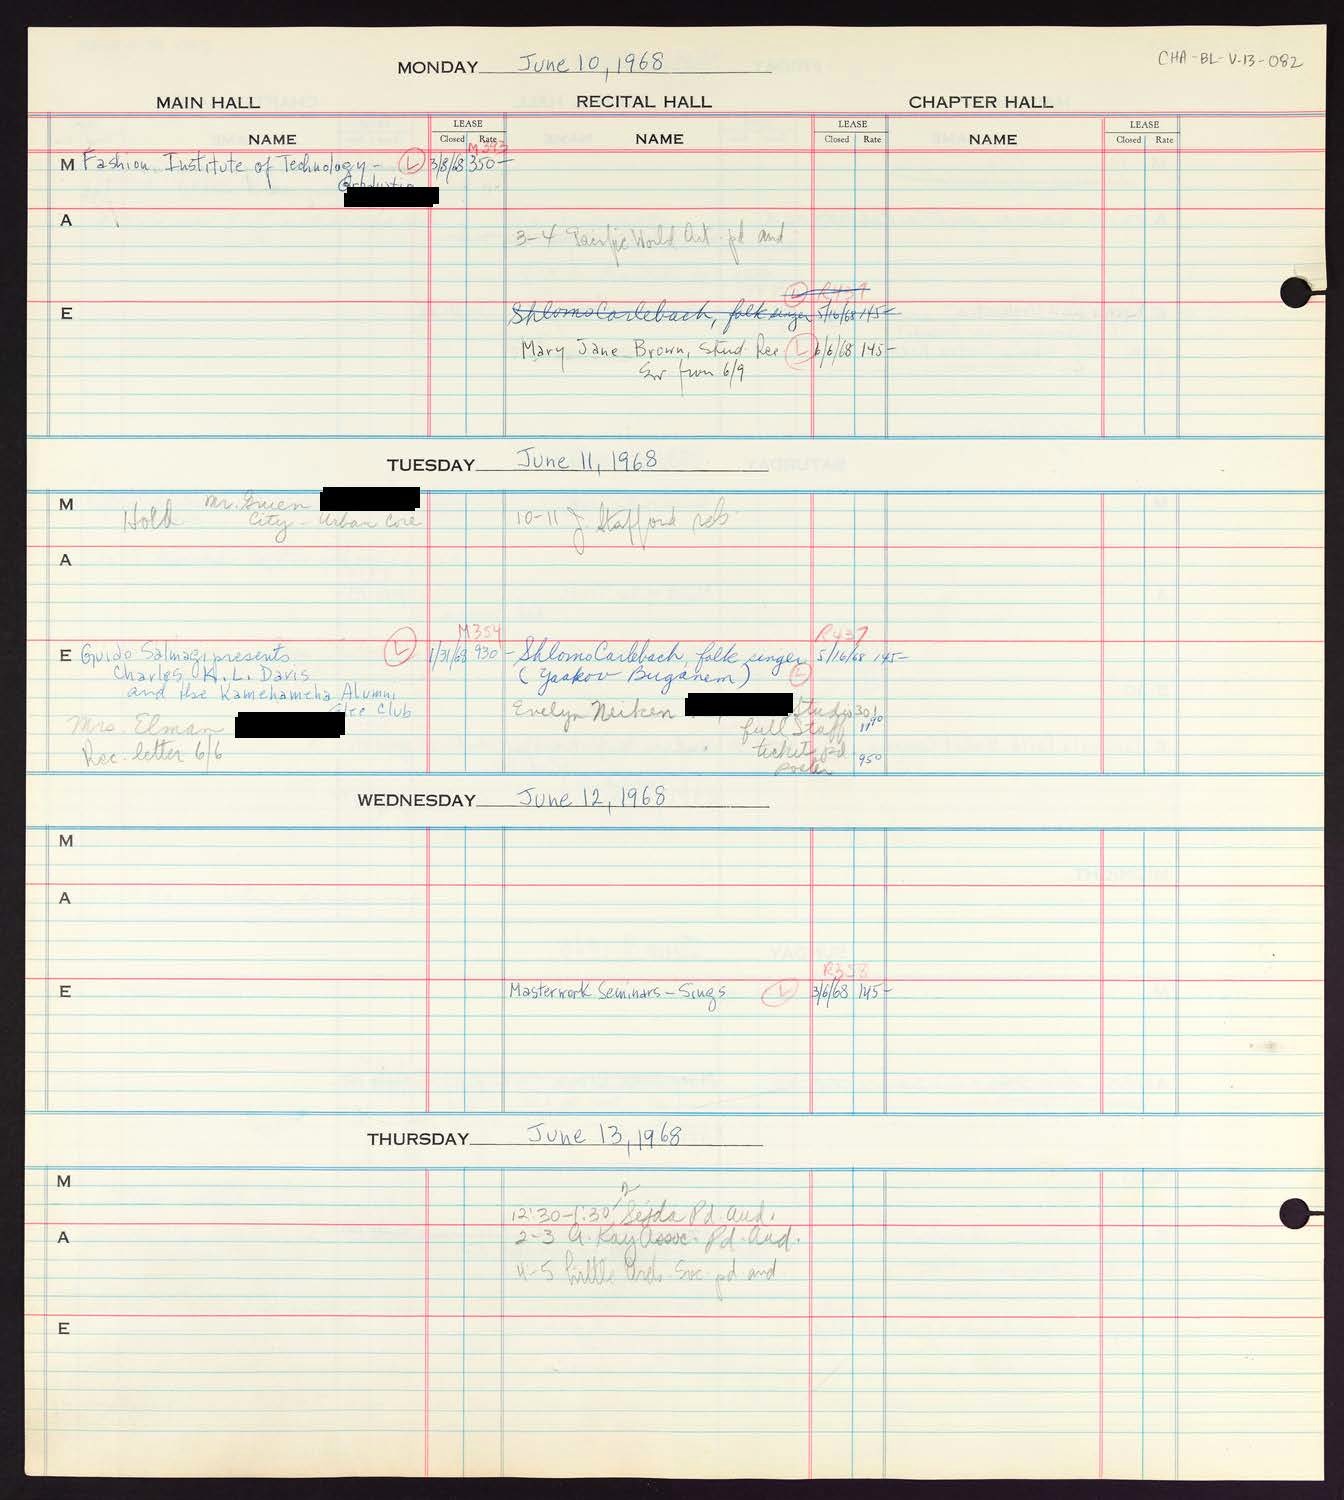 Carnegie Hall Booking Ledger, volume 13, page 82